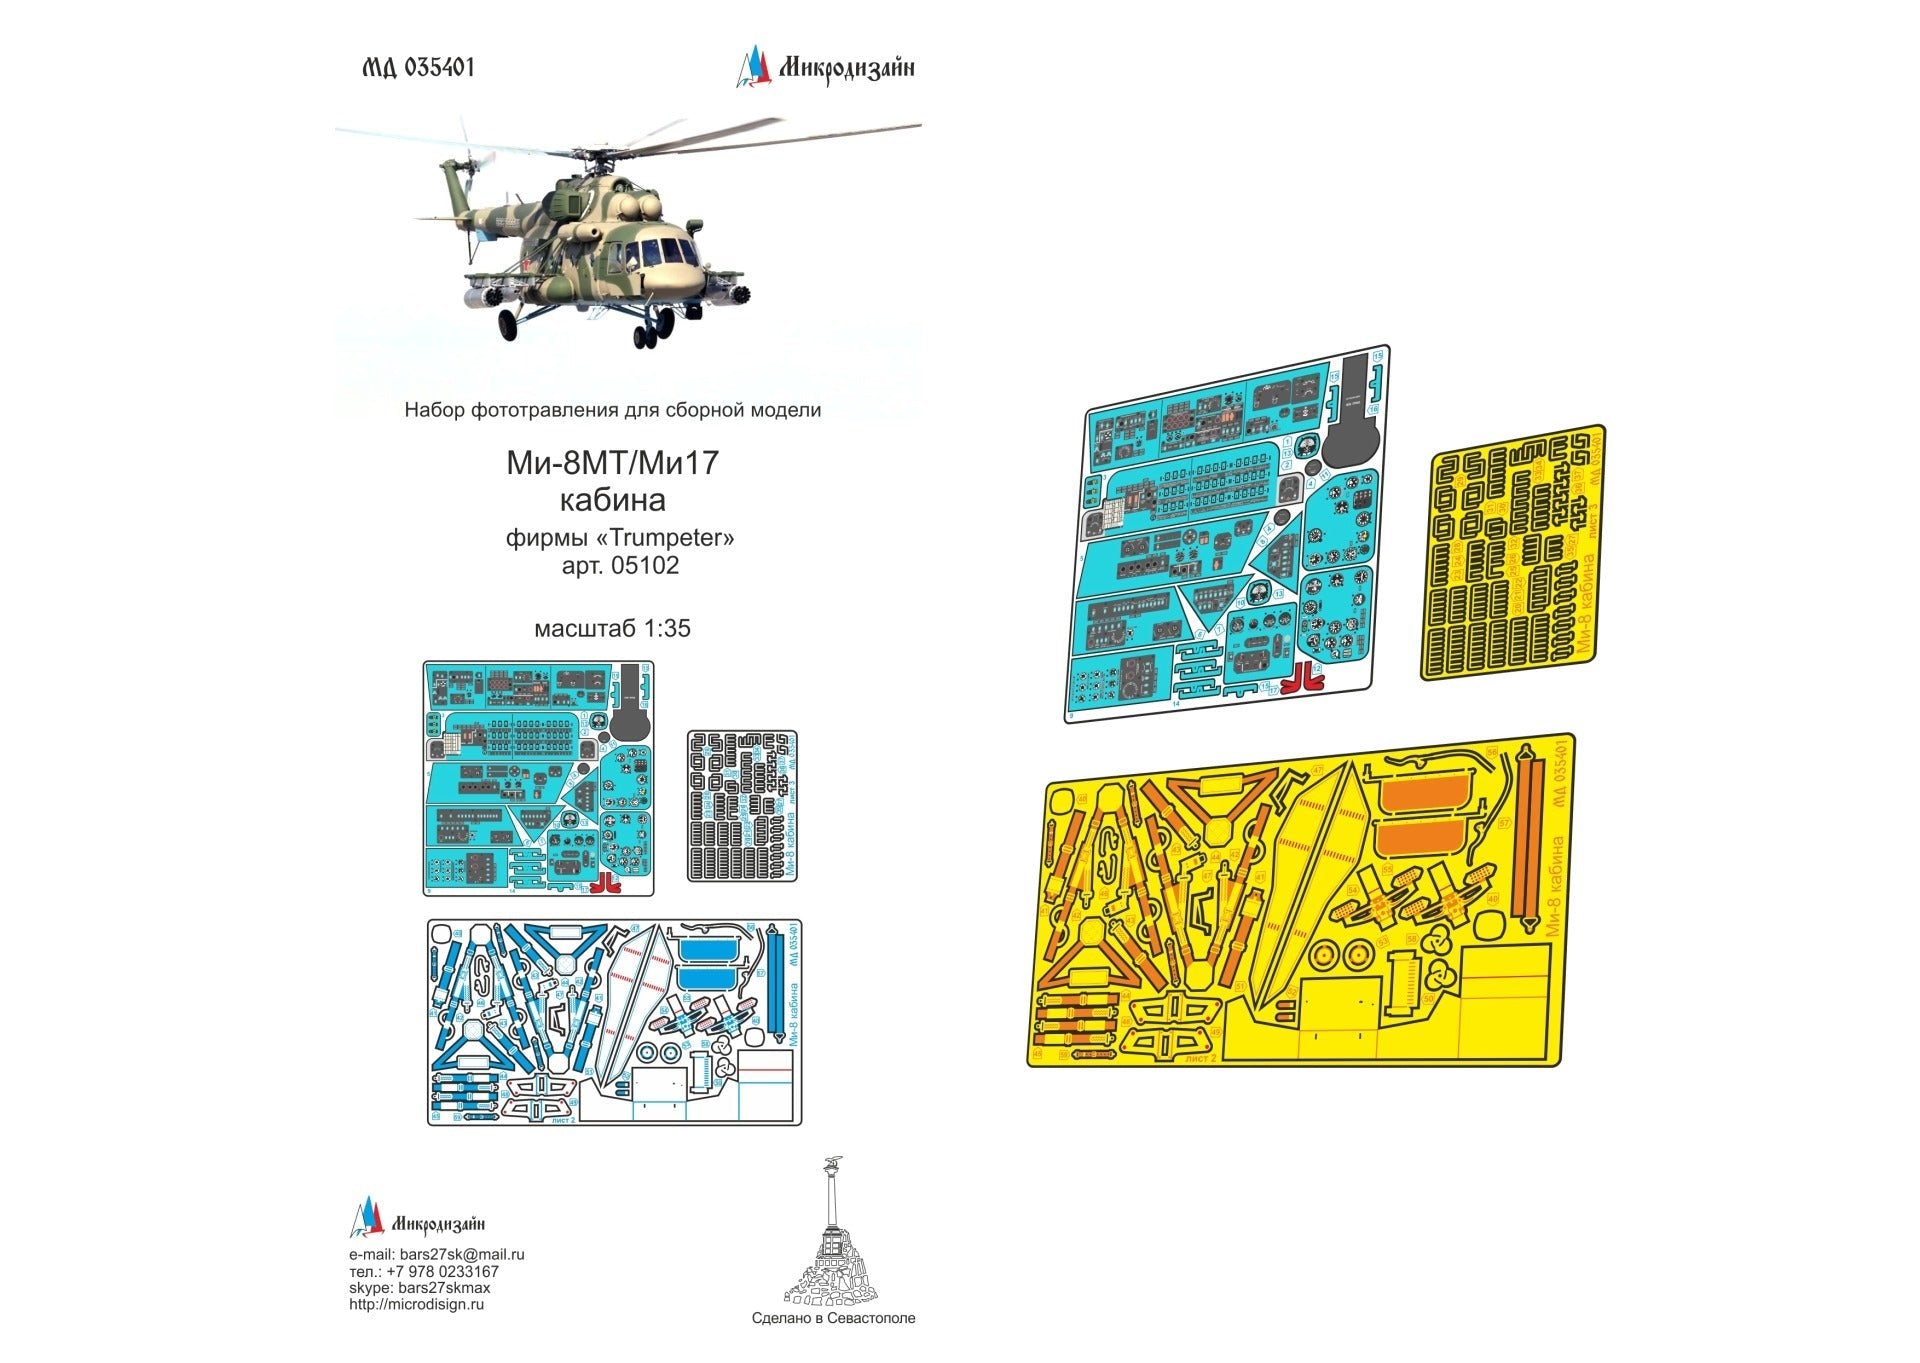 Photo-etched detailing cabin set for Mi-8MT/MI-17 by "Trumpeter" 05102, 1:35 - imodeller.store